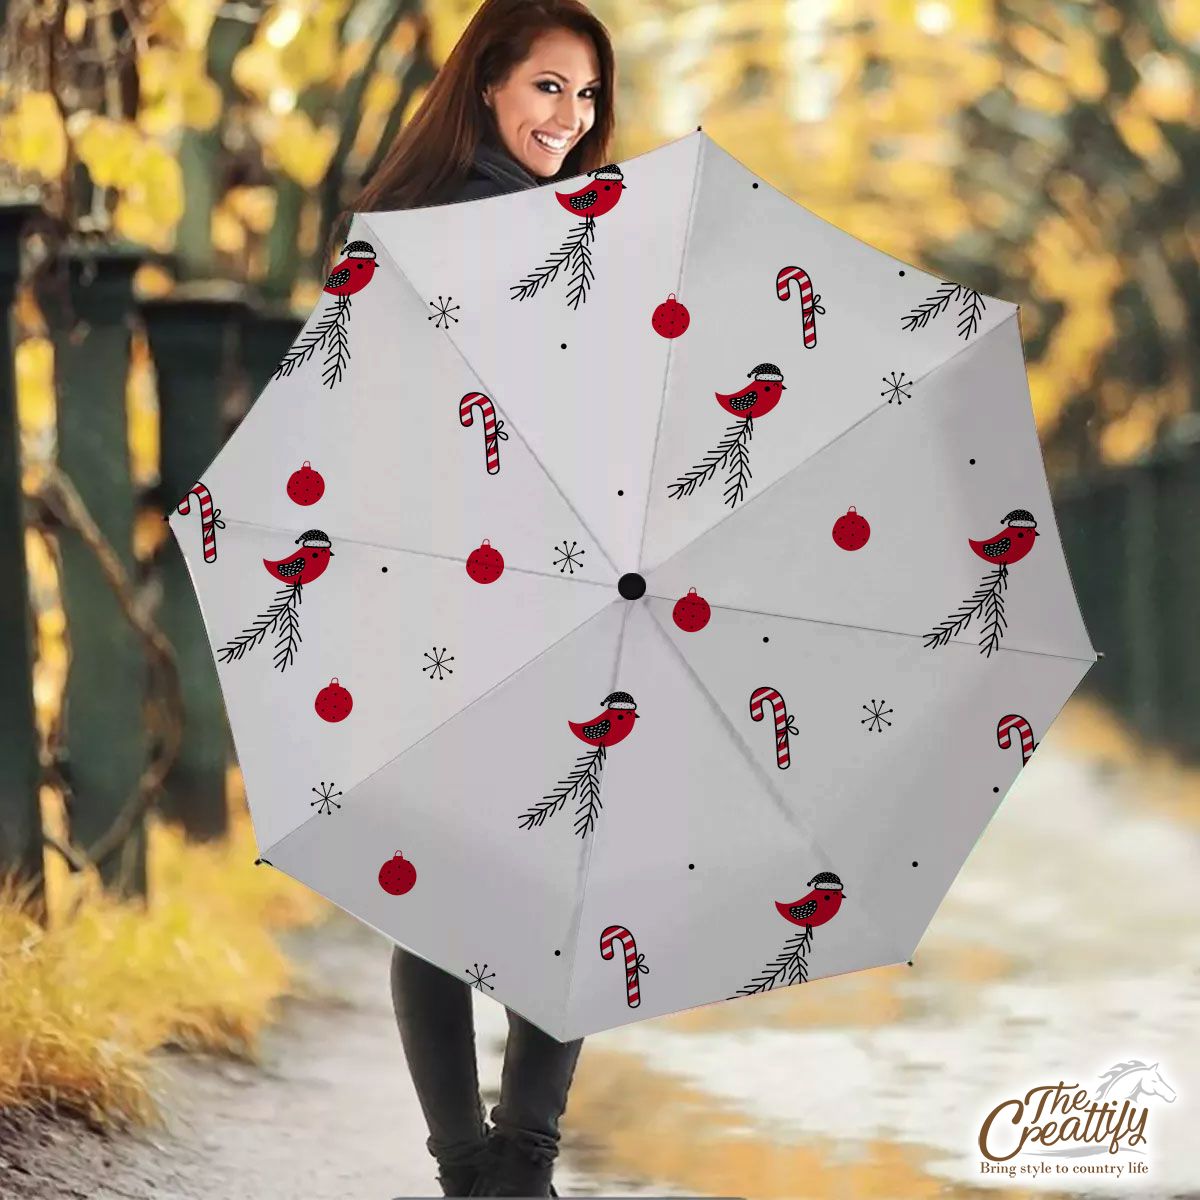 Cardinal Bird With Santa Hat, Candy Canes, Christmas Balls And Snowflake Clipart Seamless White Pattern Umbrella